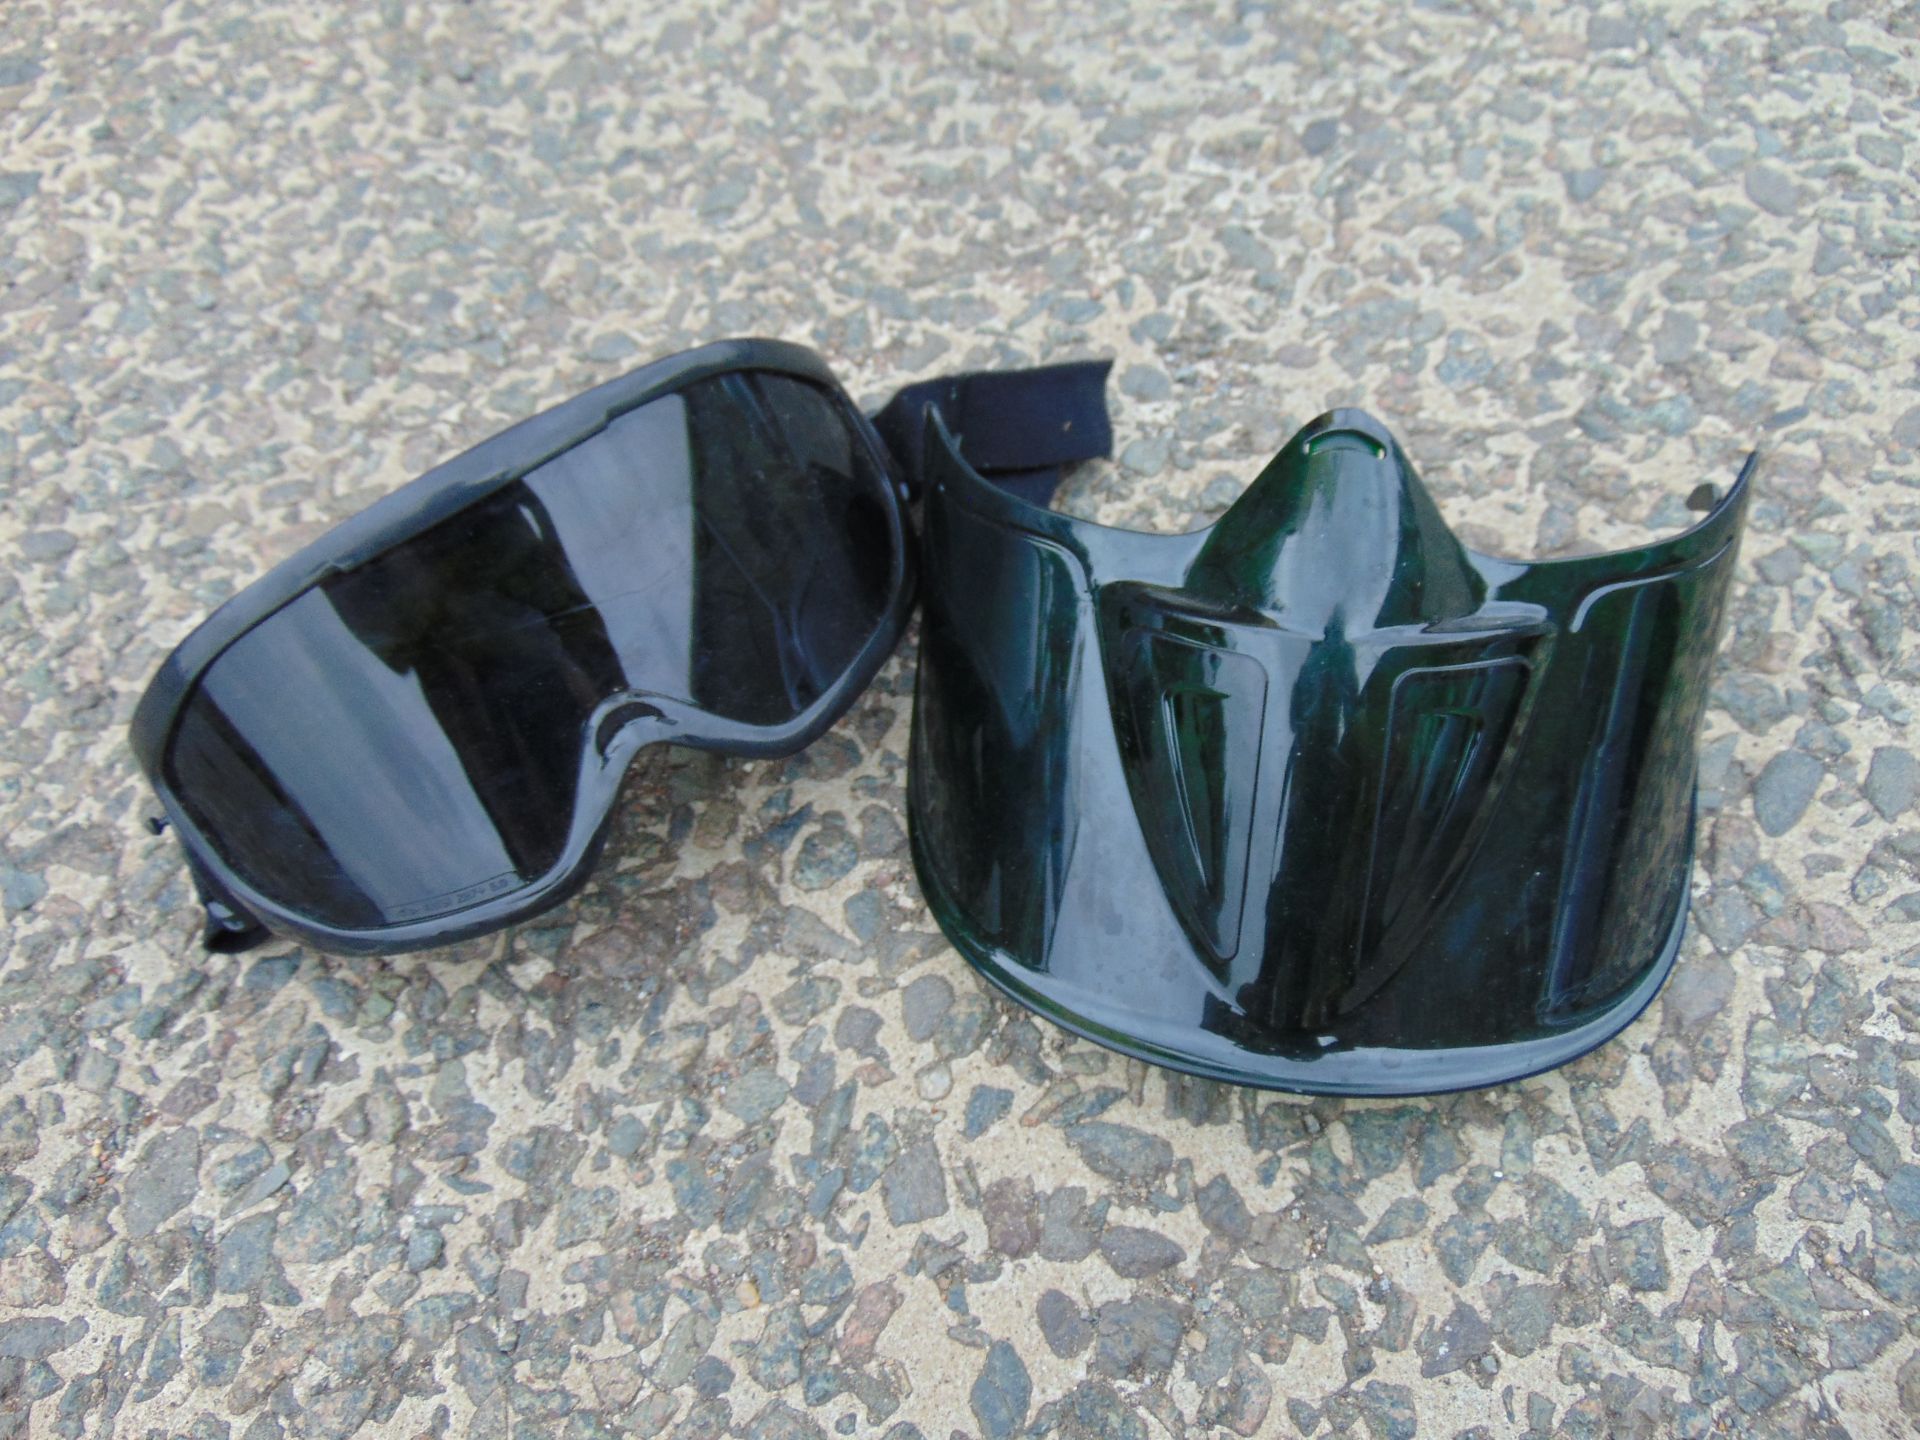 2 x Monogoggle XTR Safety Goggles C/W Face Shields - Image 4 of 6